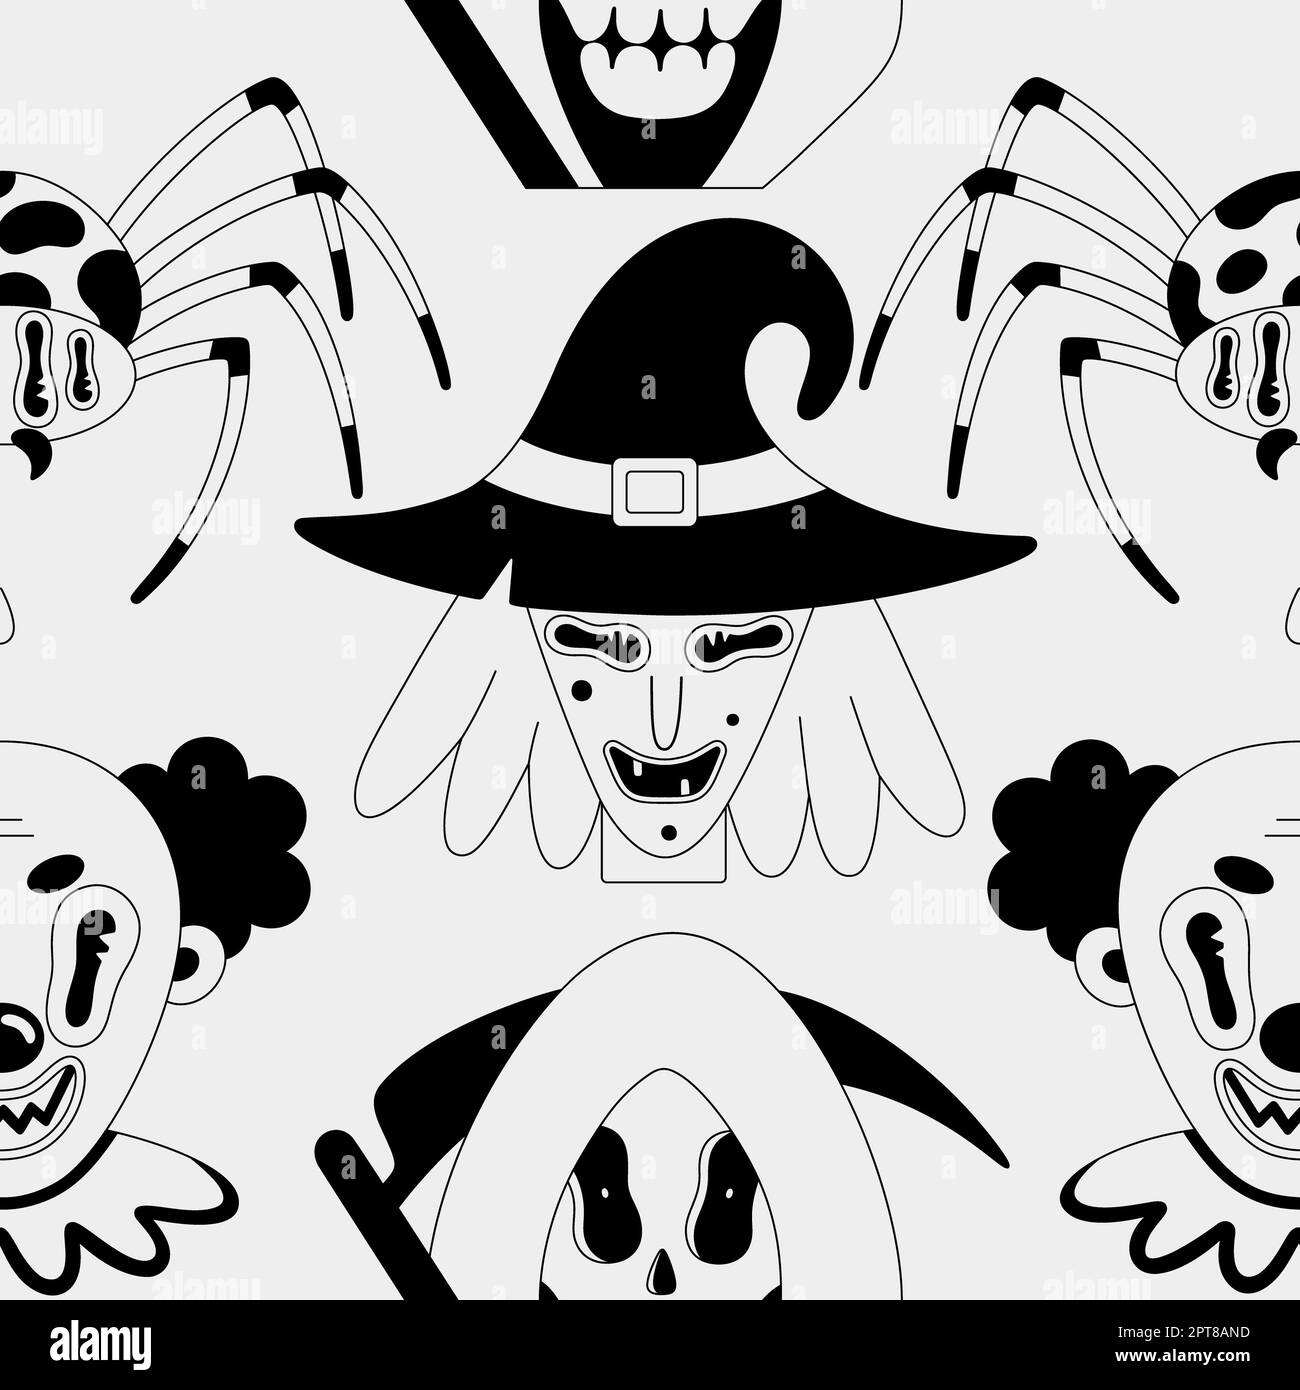 Halloween seamless pattern. Black spooky fantasy characters on white background. Witch, poisonous spider, creepy clown grim reaper. Cartoon scary port Stock Photo